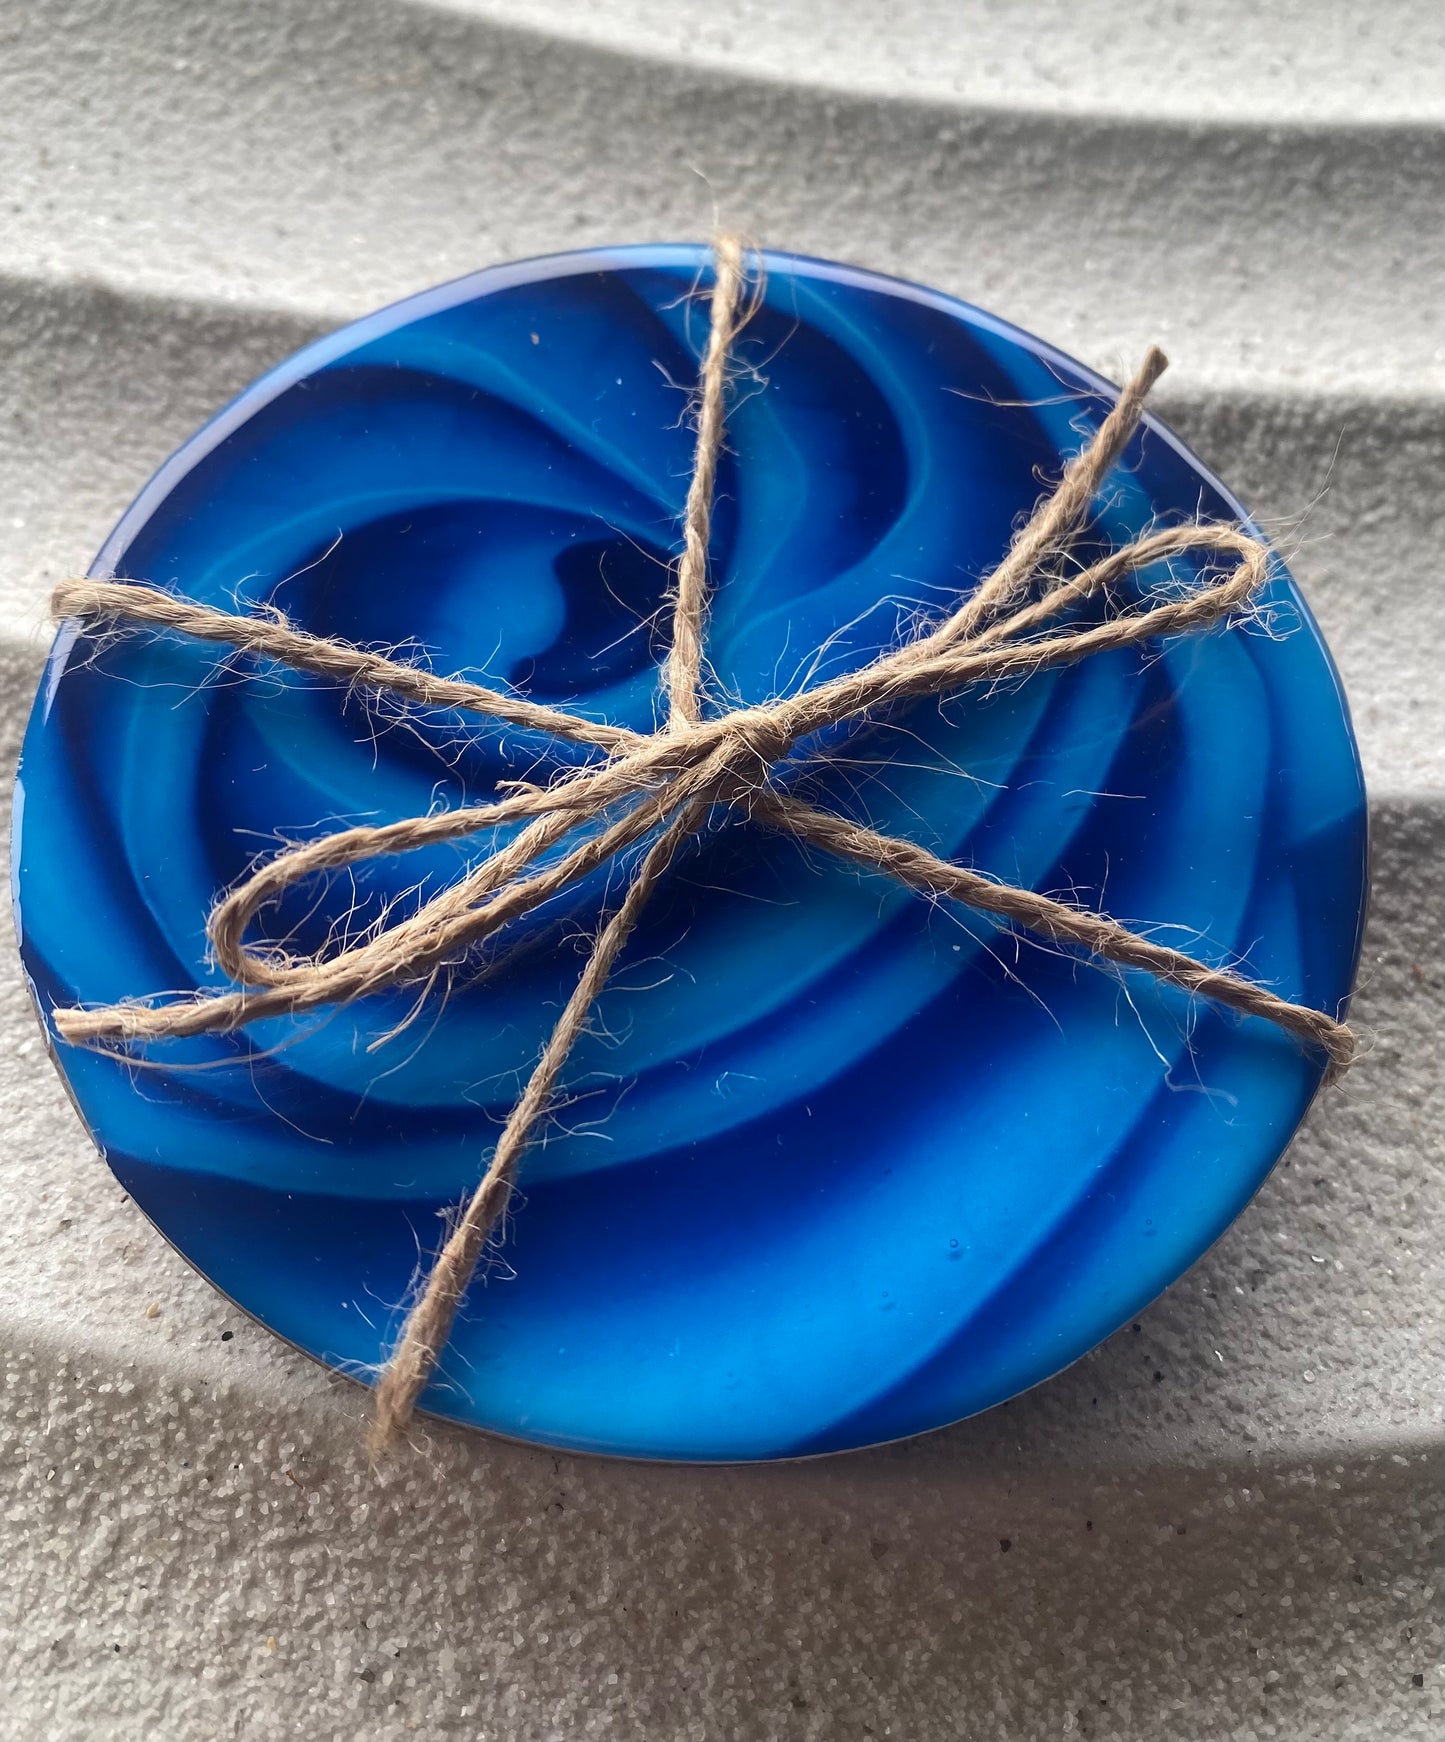 Blue rose, wood printed coasters coated with resin. Cork bottom set of 4